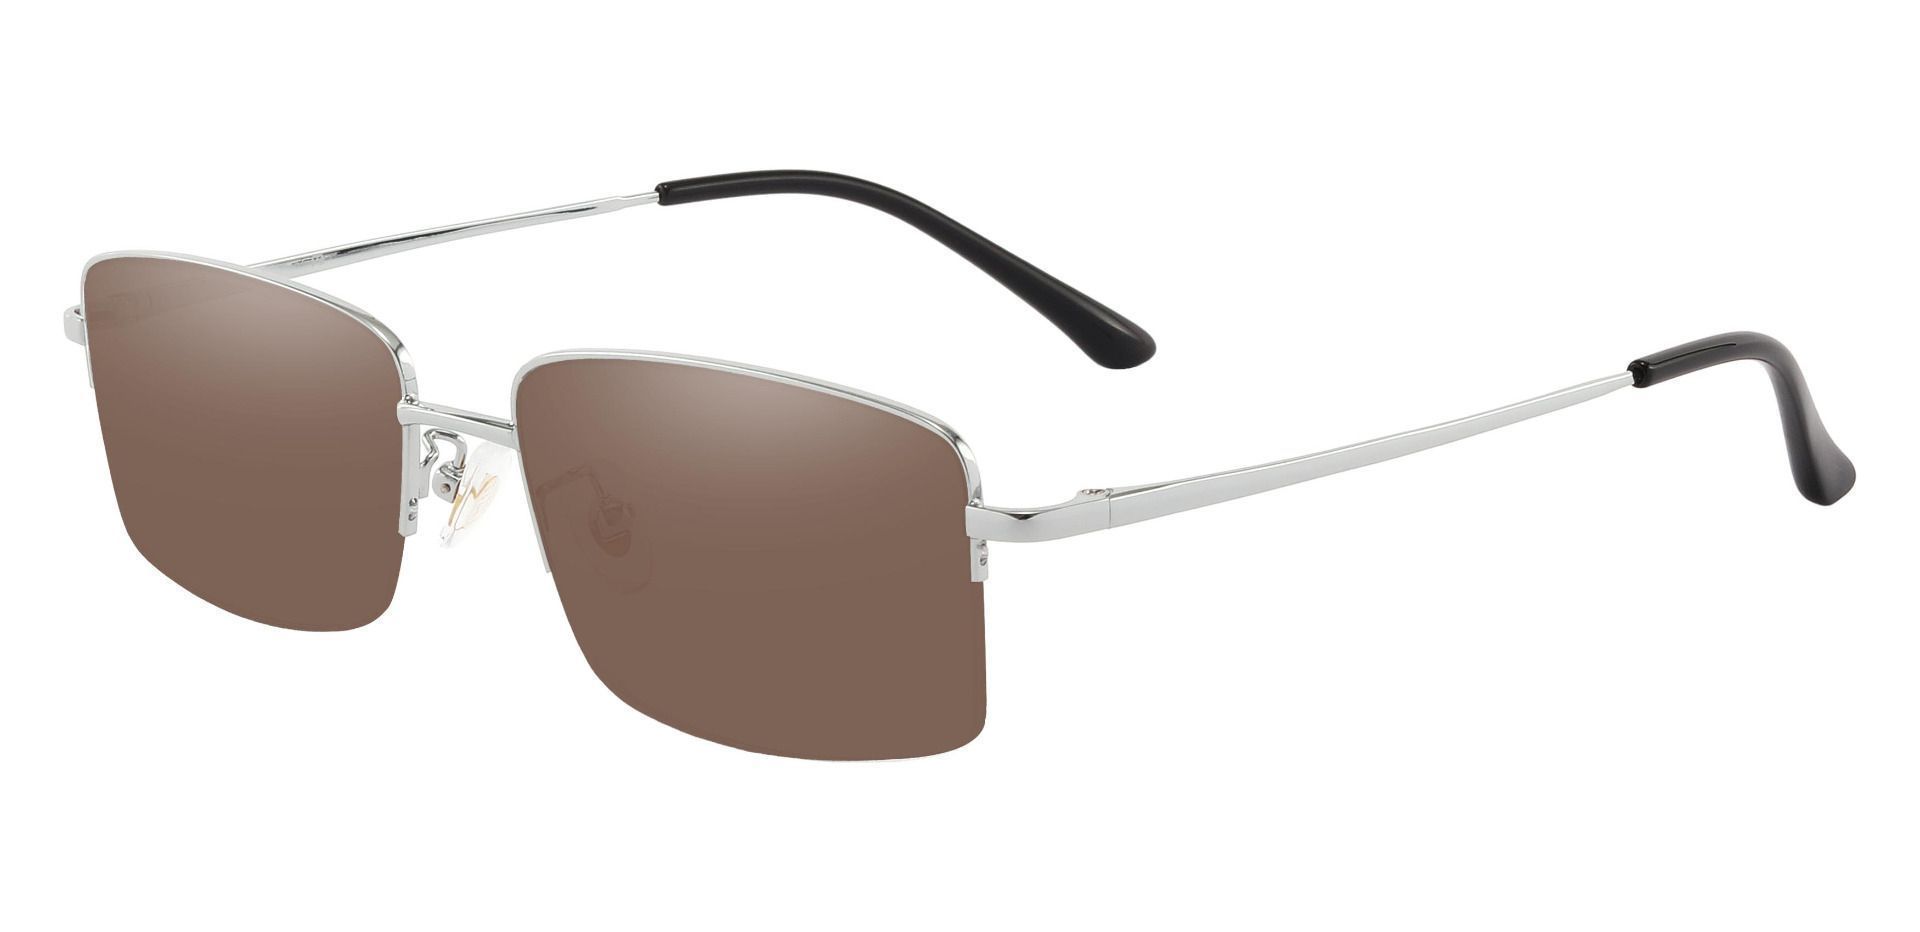 Bellmont Rectangle Non-Rx Sunglasses - Silver Frame With Brown Lenses